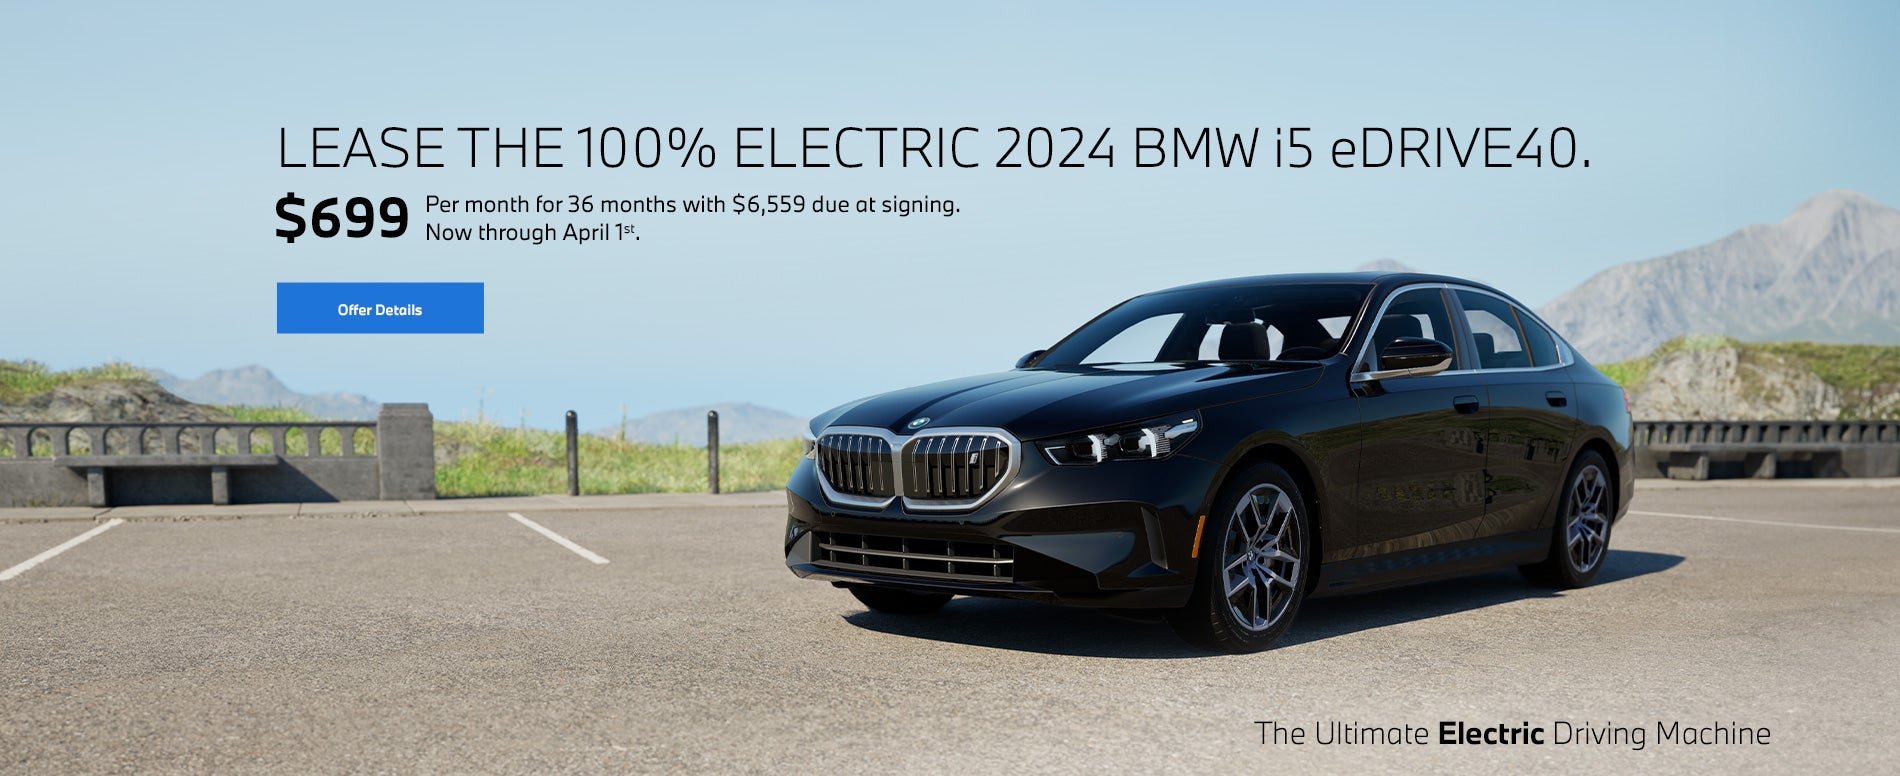 2024 i5 eDrive40 lease starting at $699 per month for 36 mo